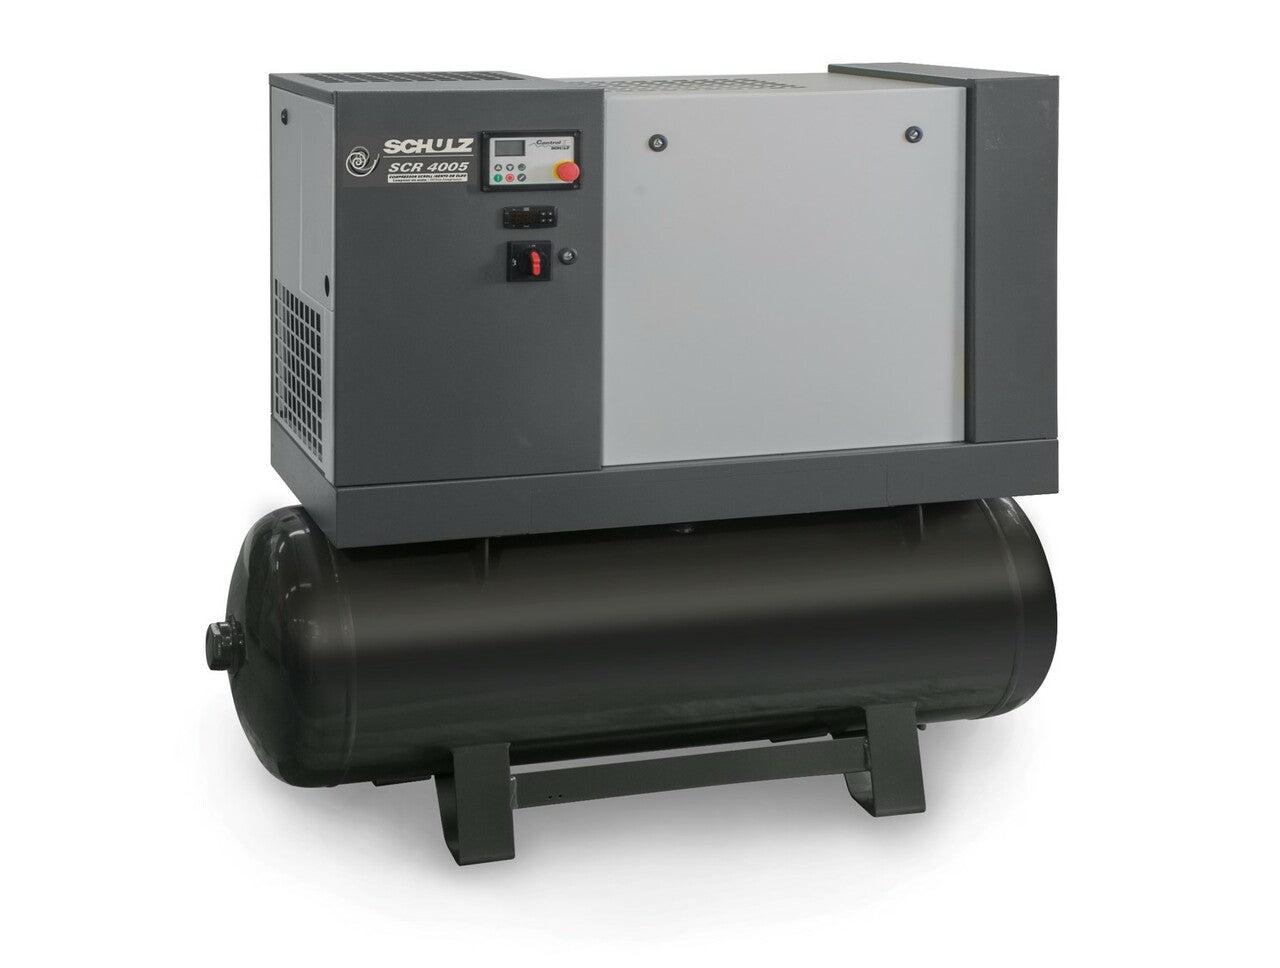 Schulz of America  SCR 4010 TS 116 PSI @ 28.5 CFM  208-230/460V Three Phase Cabinetized Scroll Compressor - Base Mounted w/ Fan Cooled Aftercooler, Pre-filter & Dryer (PLC Controlled)